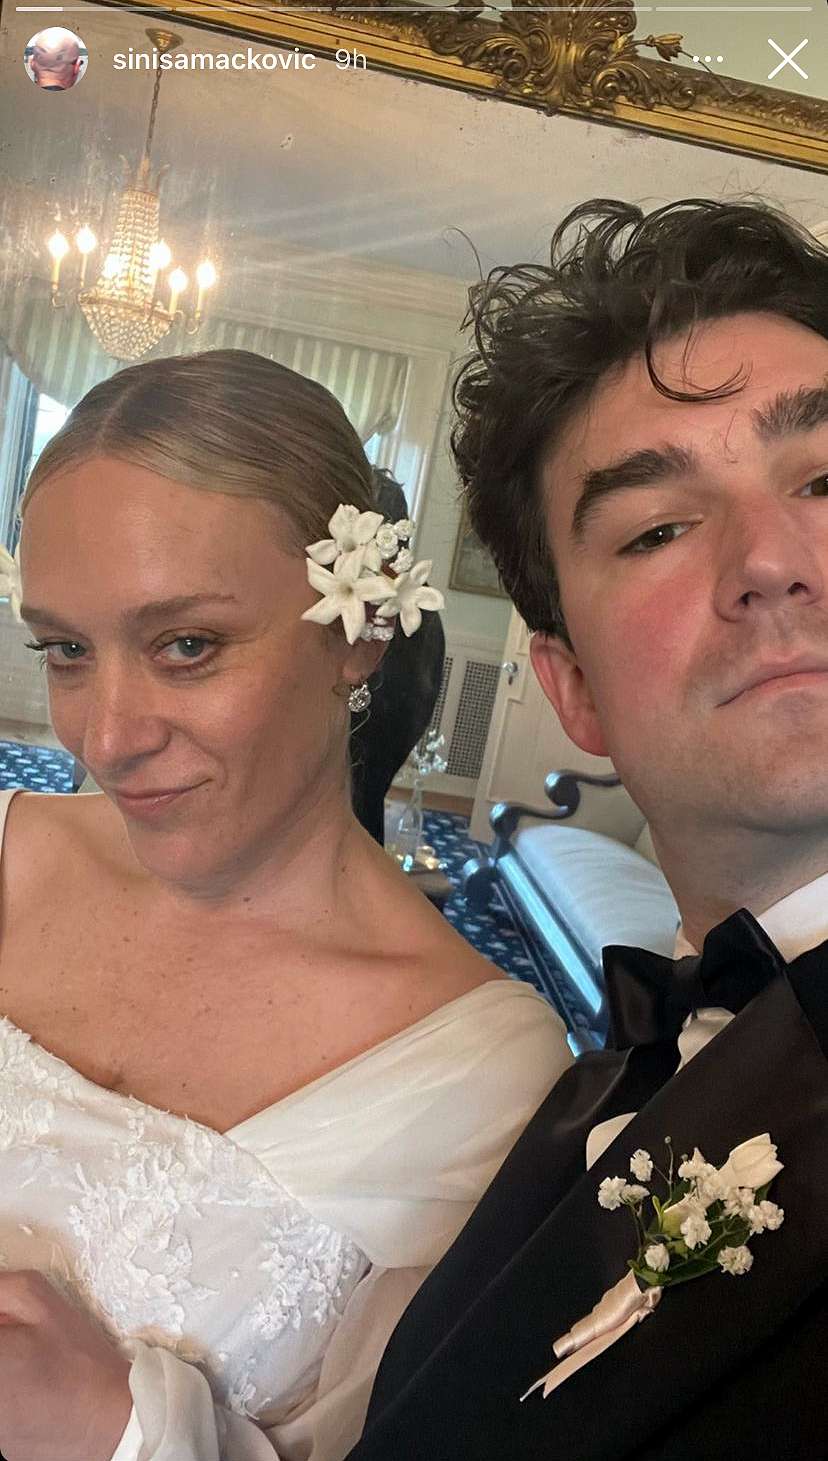 Chloë Sevigny Has Wedding Two Years After Tying the Knot at N.Y.C. City Hall with Sinisa Mackovic